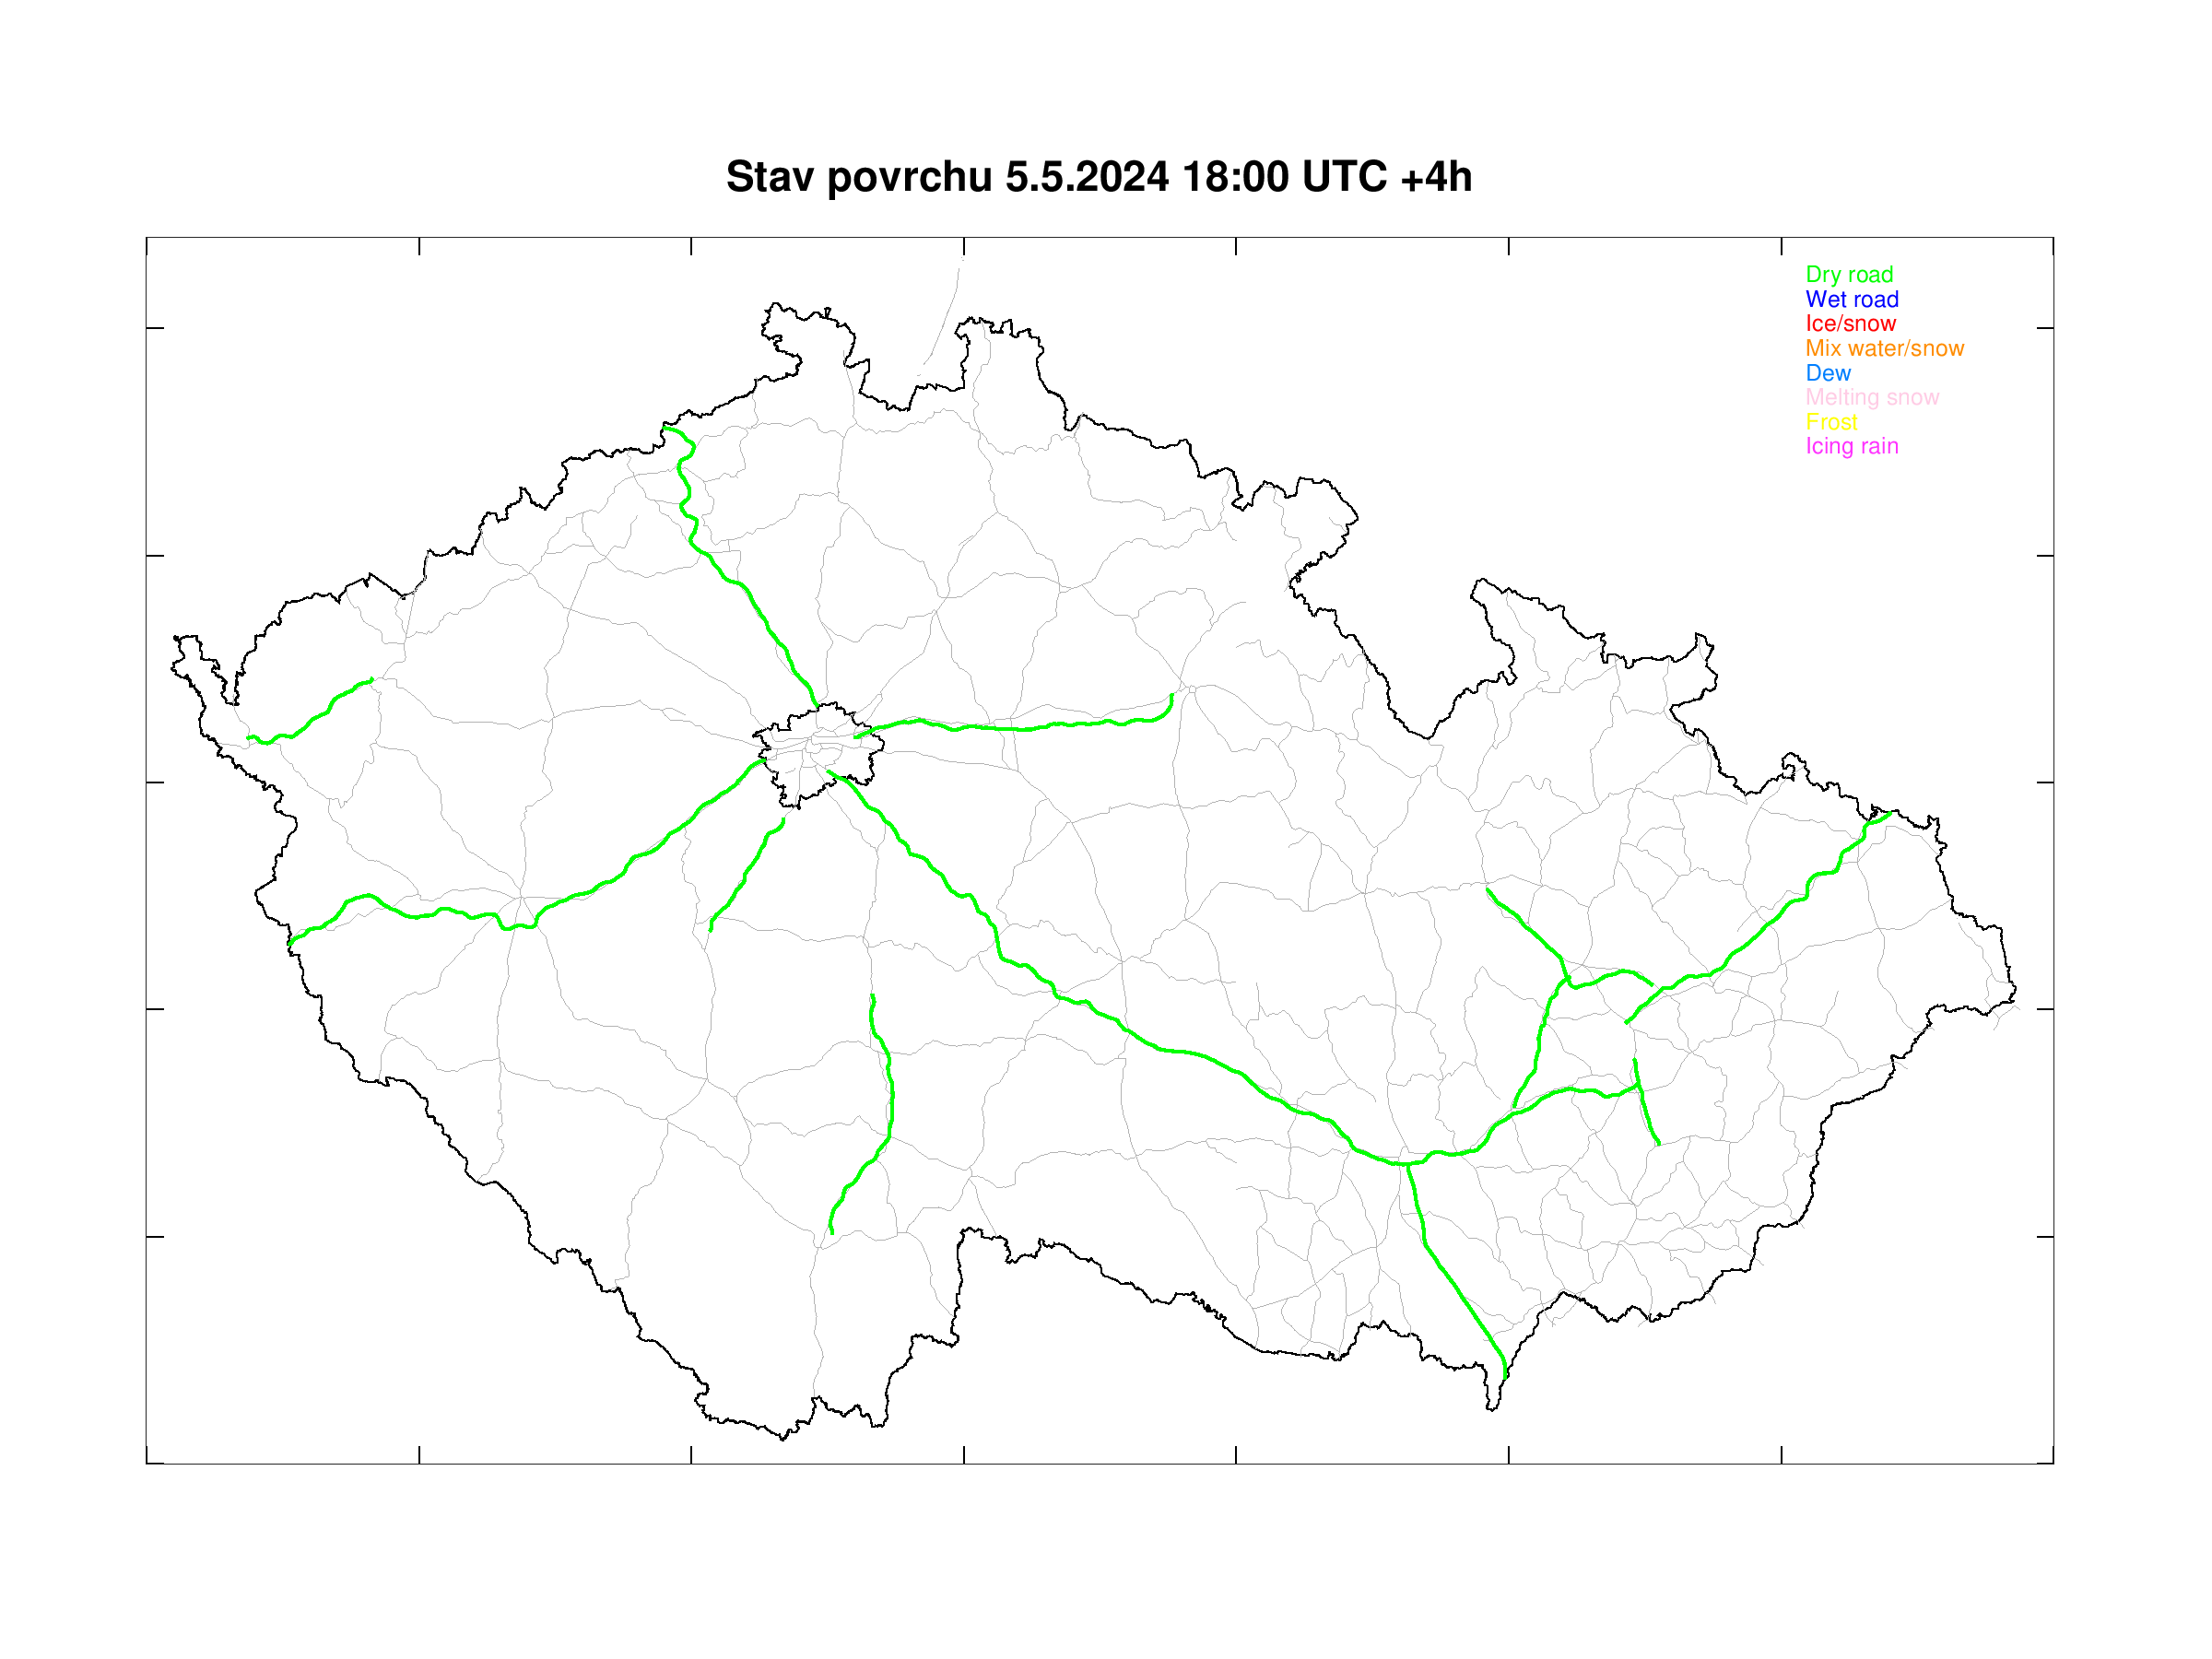 Road surface condition forecast for Czech highways +4h